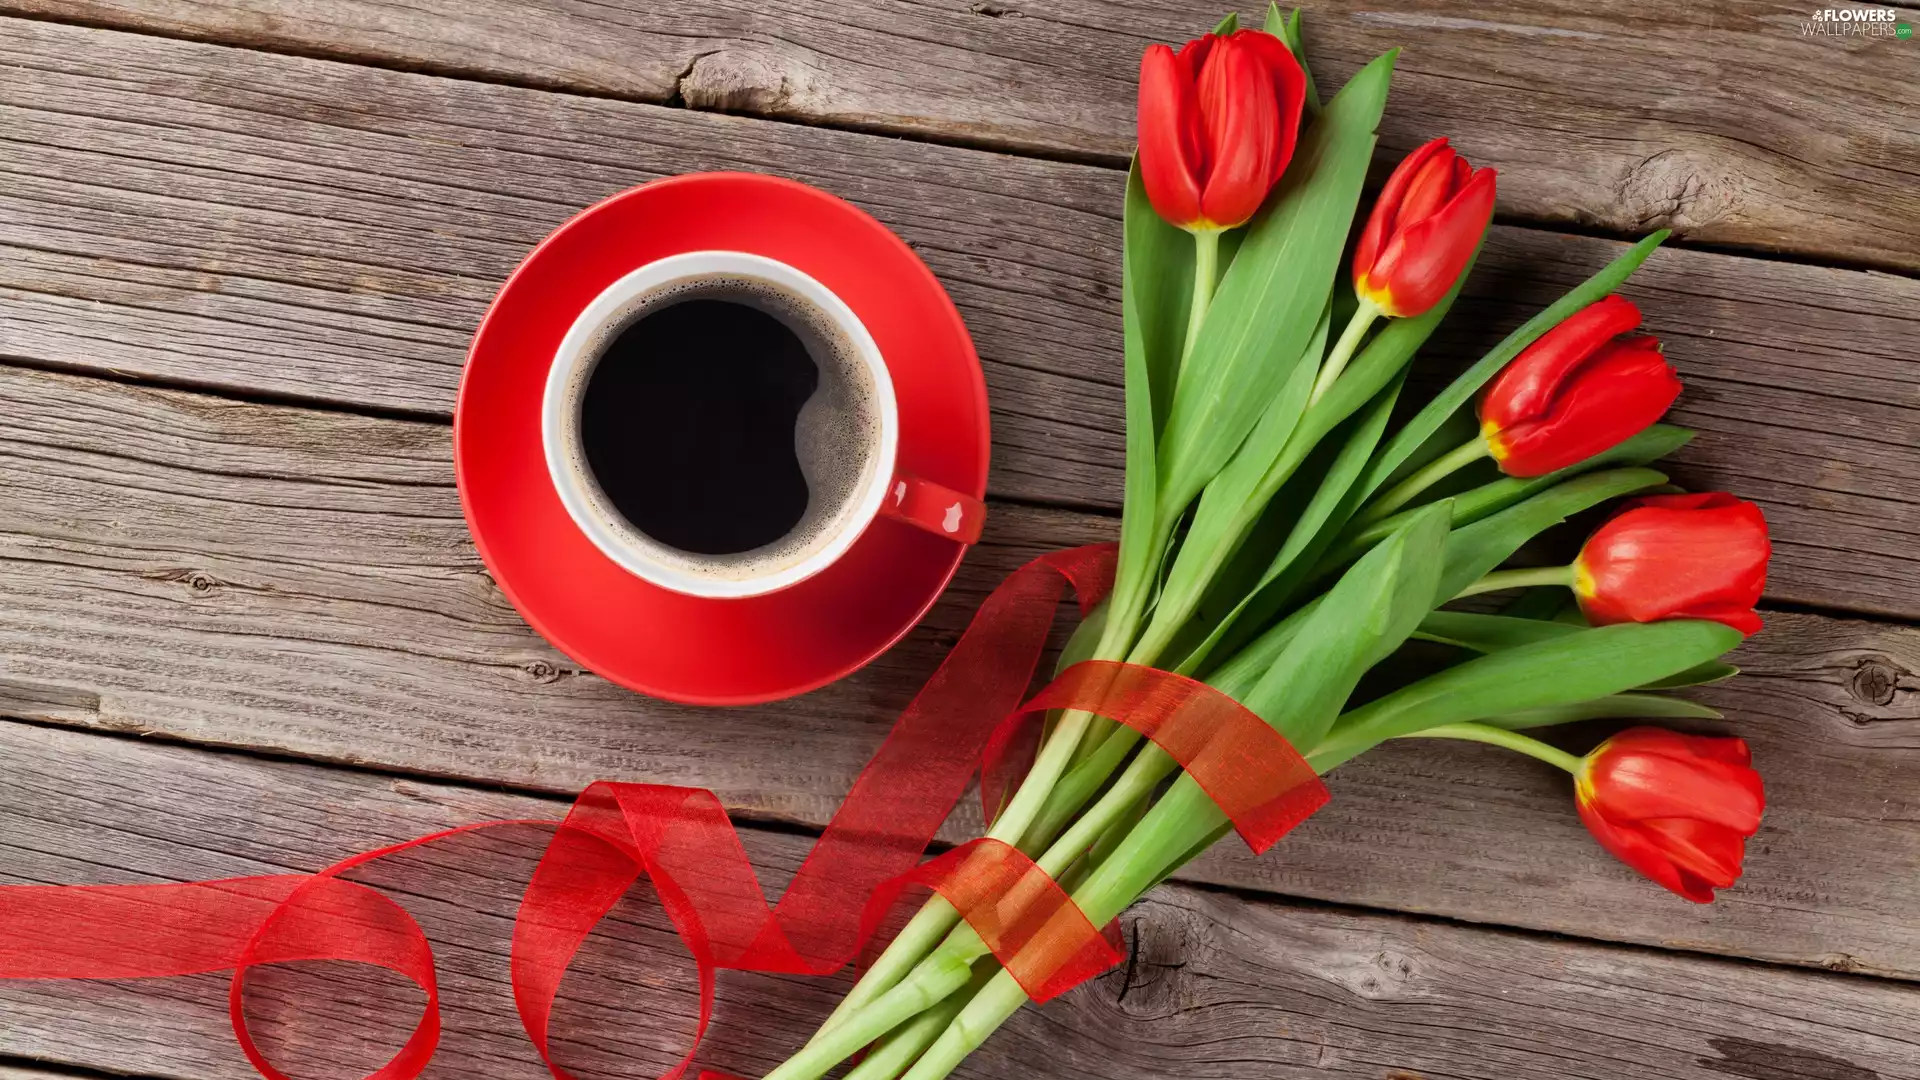 Red, red hot, ribbon, cup, coffee, Tulips, boarding